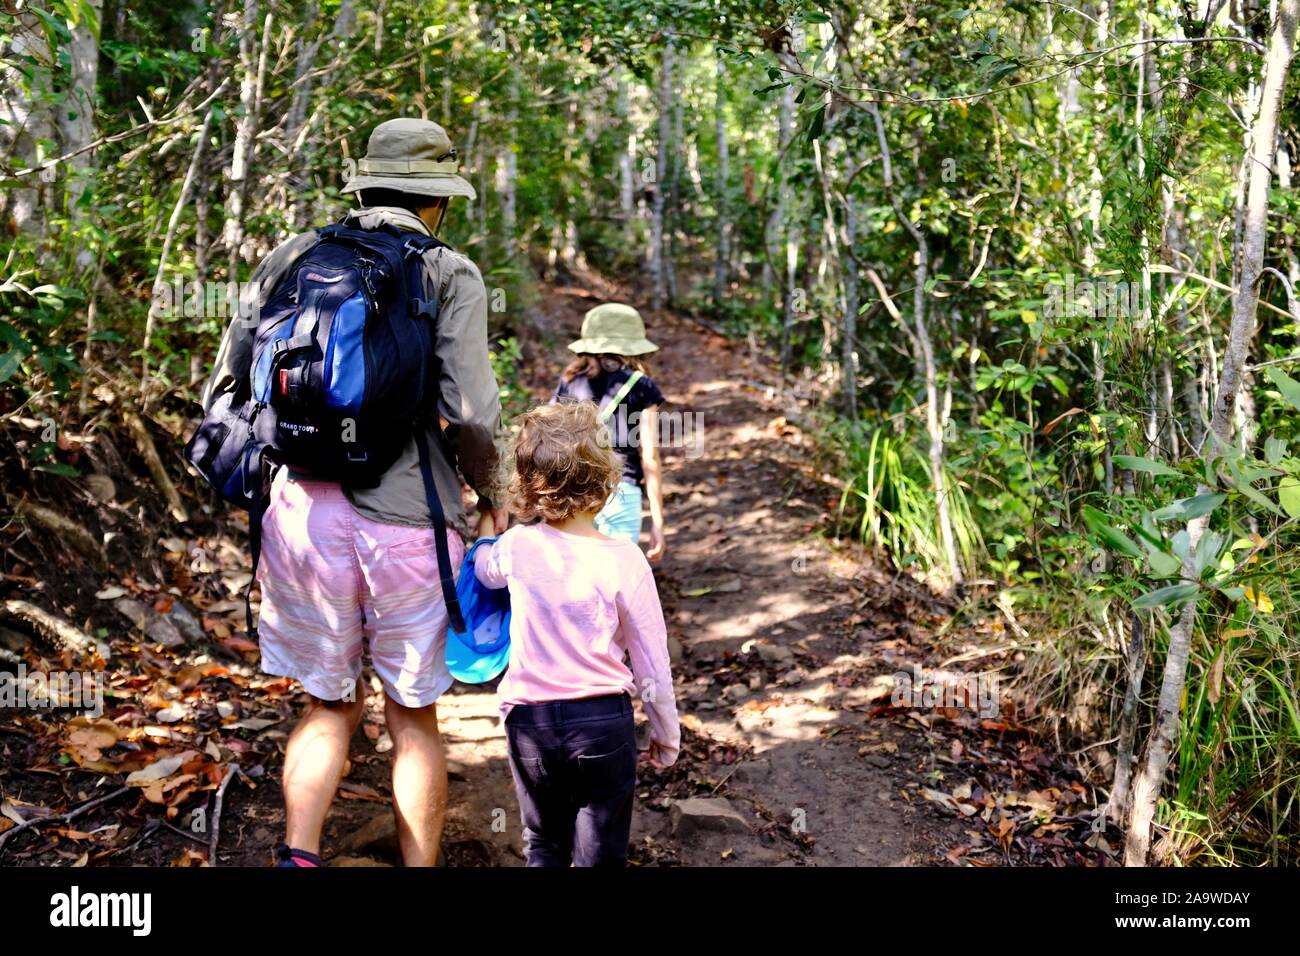 School age children walking on a forest path,  Honeyeater lookout hiking trail, Conway national park, Airlie Beach, Queensland, Australia Stock Photo